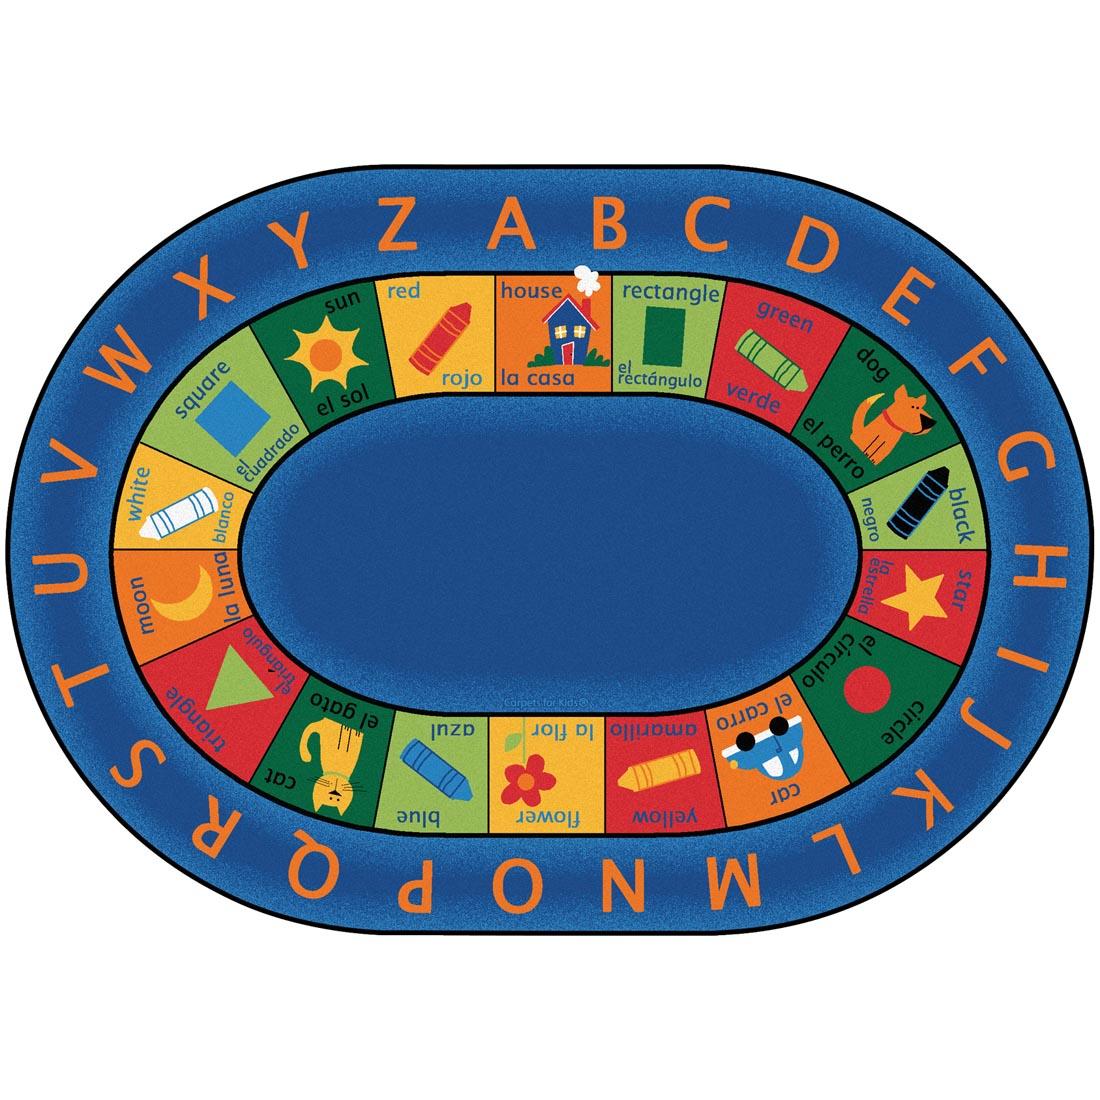 Bilingual Circle Time Oval Rug by Carpets For Kids